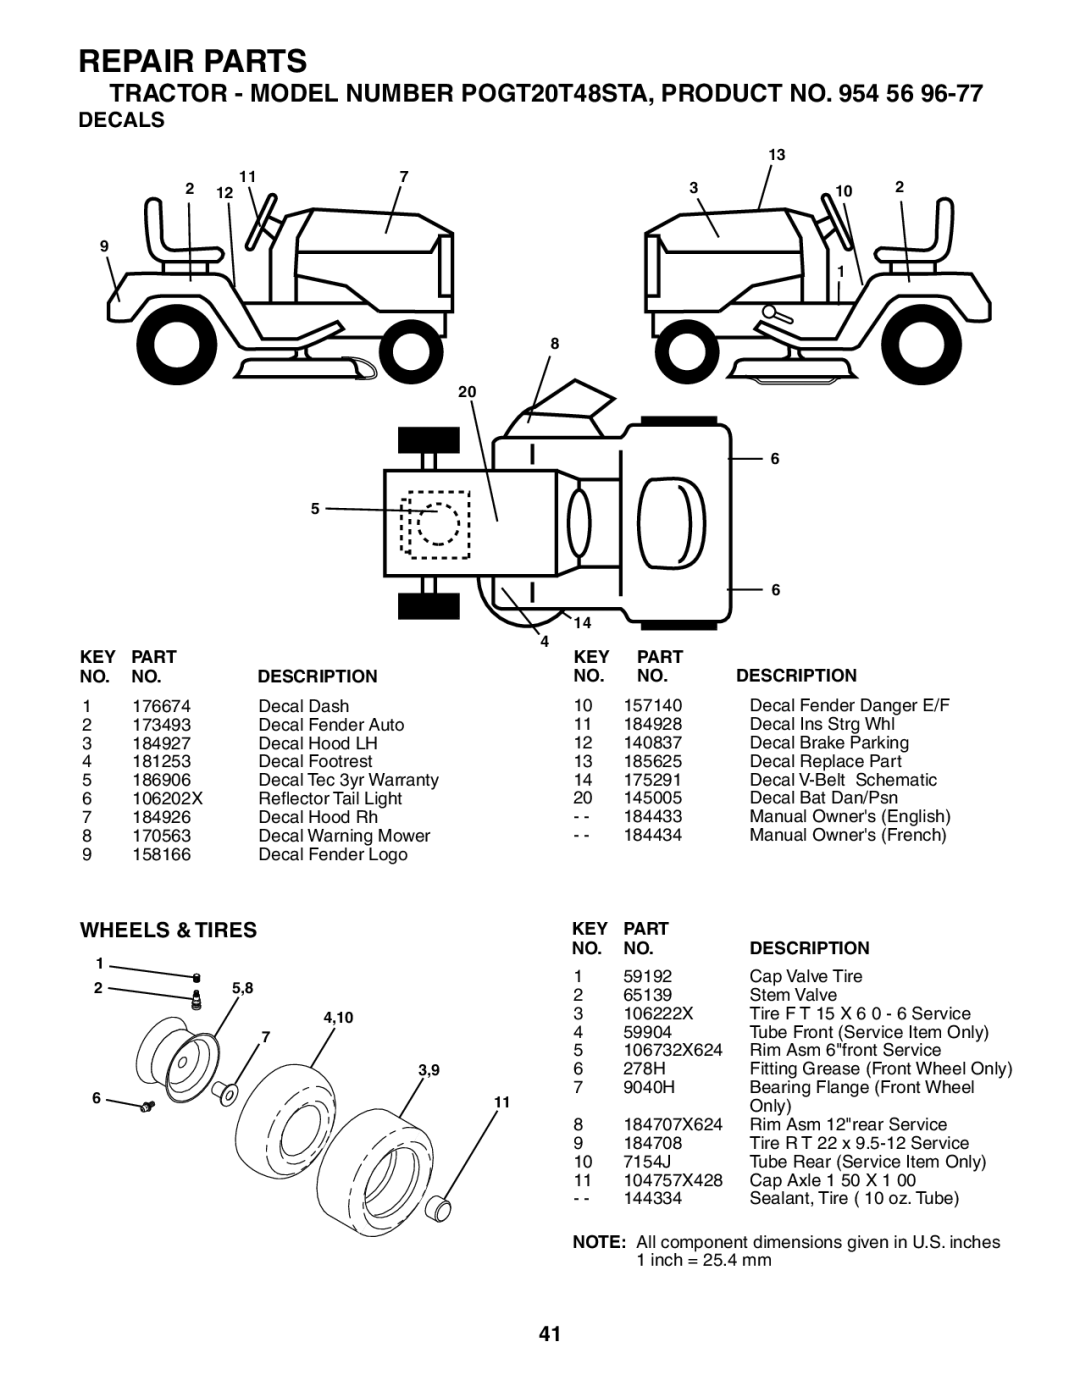 Poulan POGT20T48STA manual Decals, Wheels & Tires 